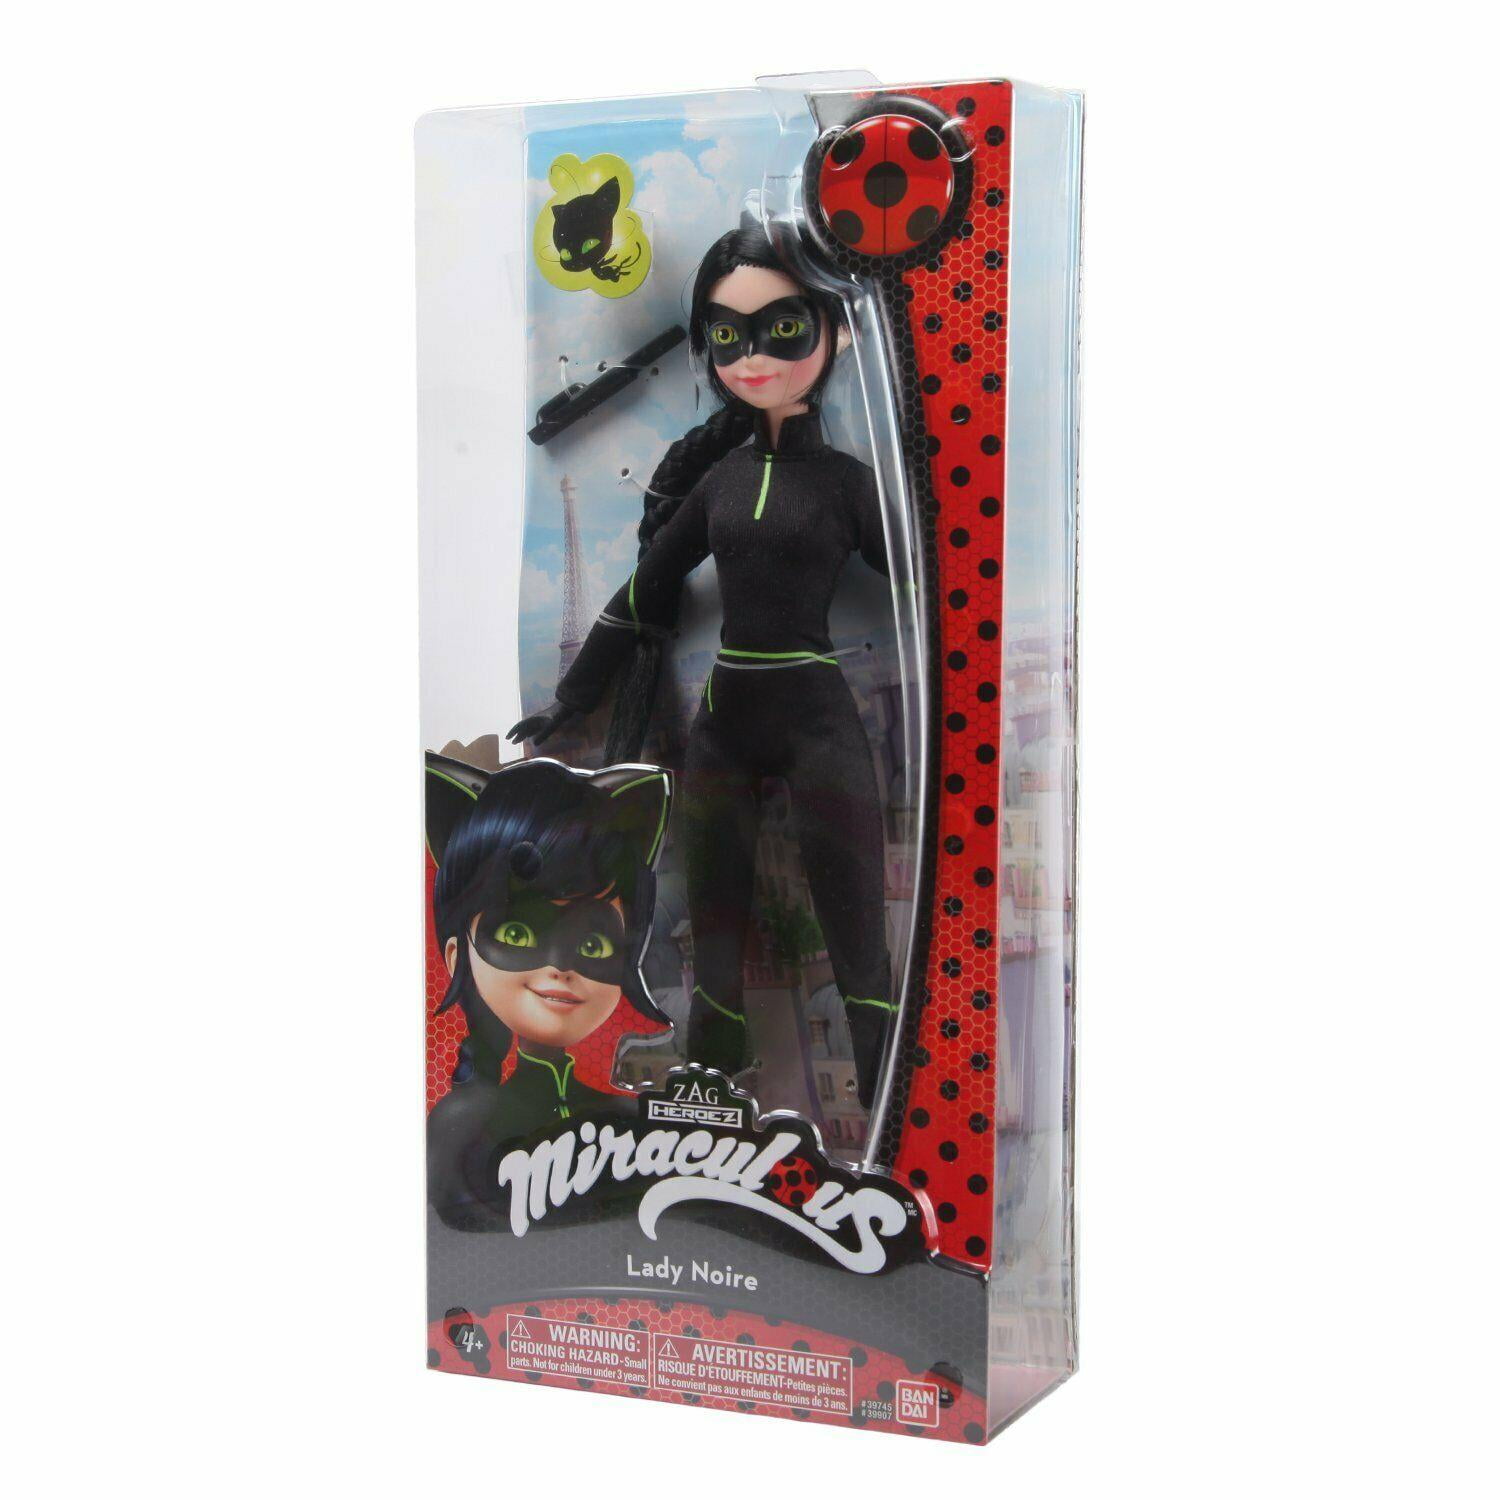 Authentic Brand New in Box Bandai Miraculous CAT NOIR Fashion Doll 